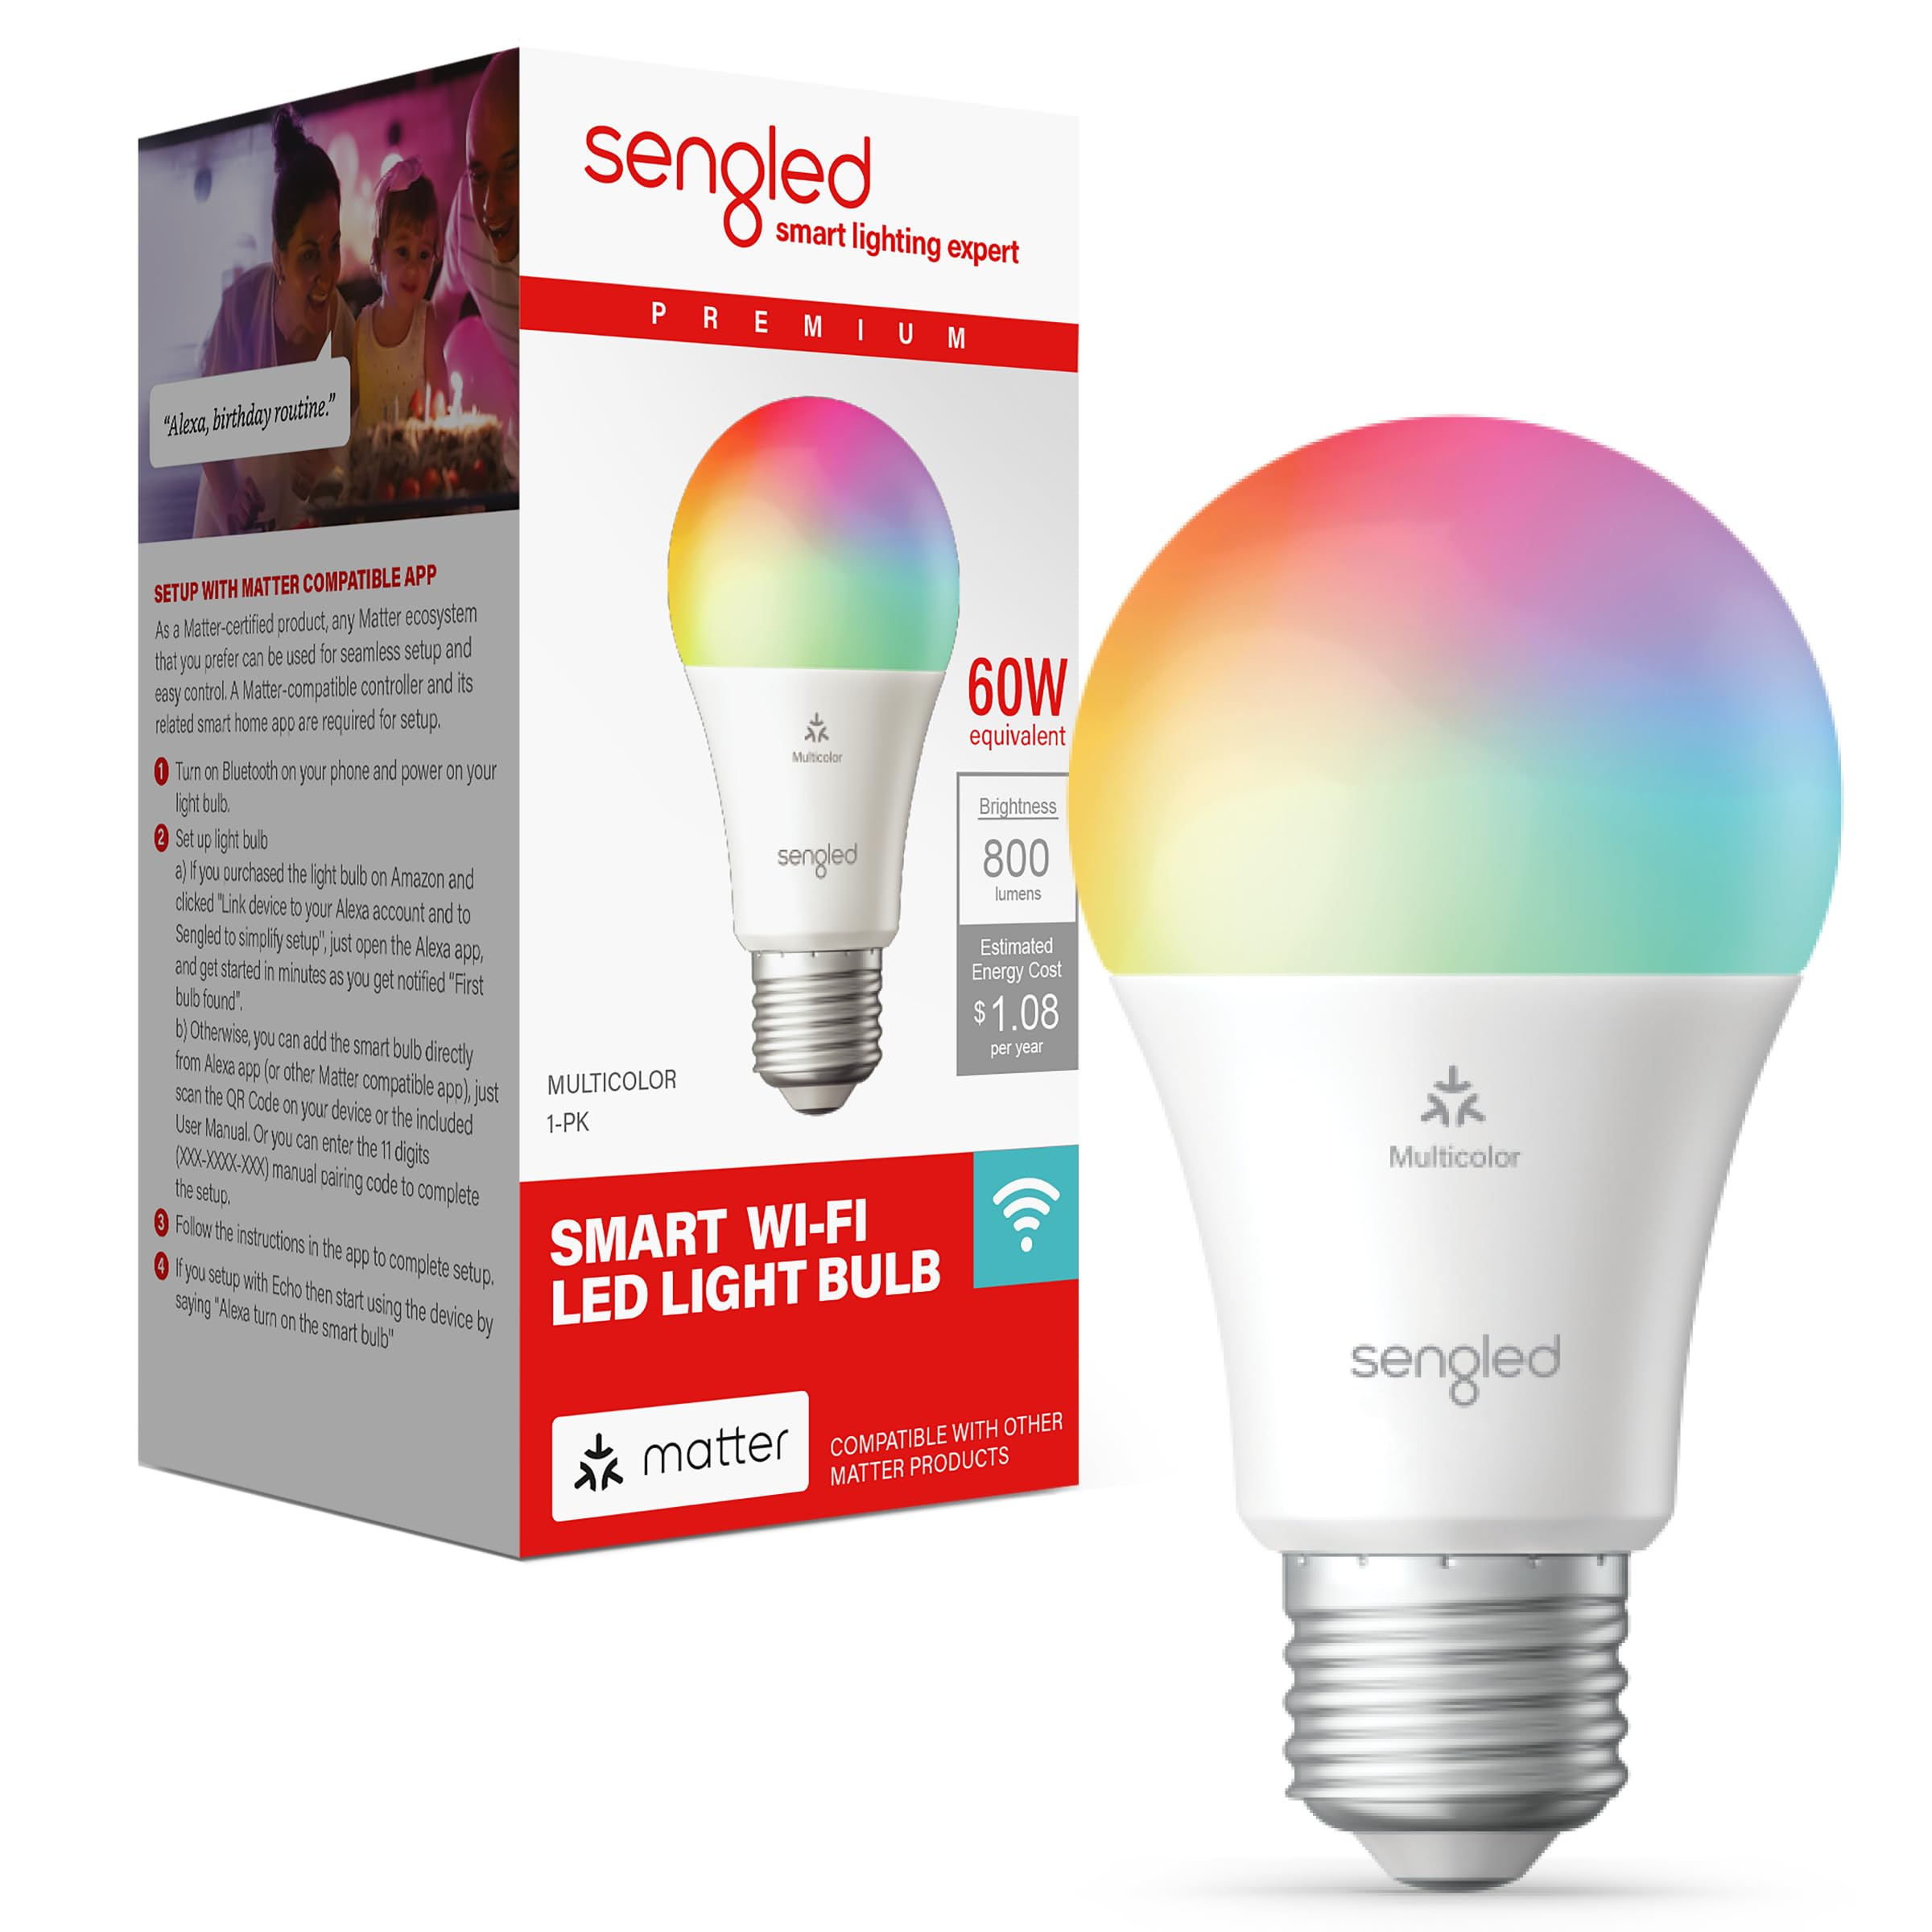 How to Connect Sengled Bulb to Wifi